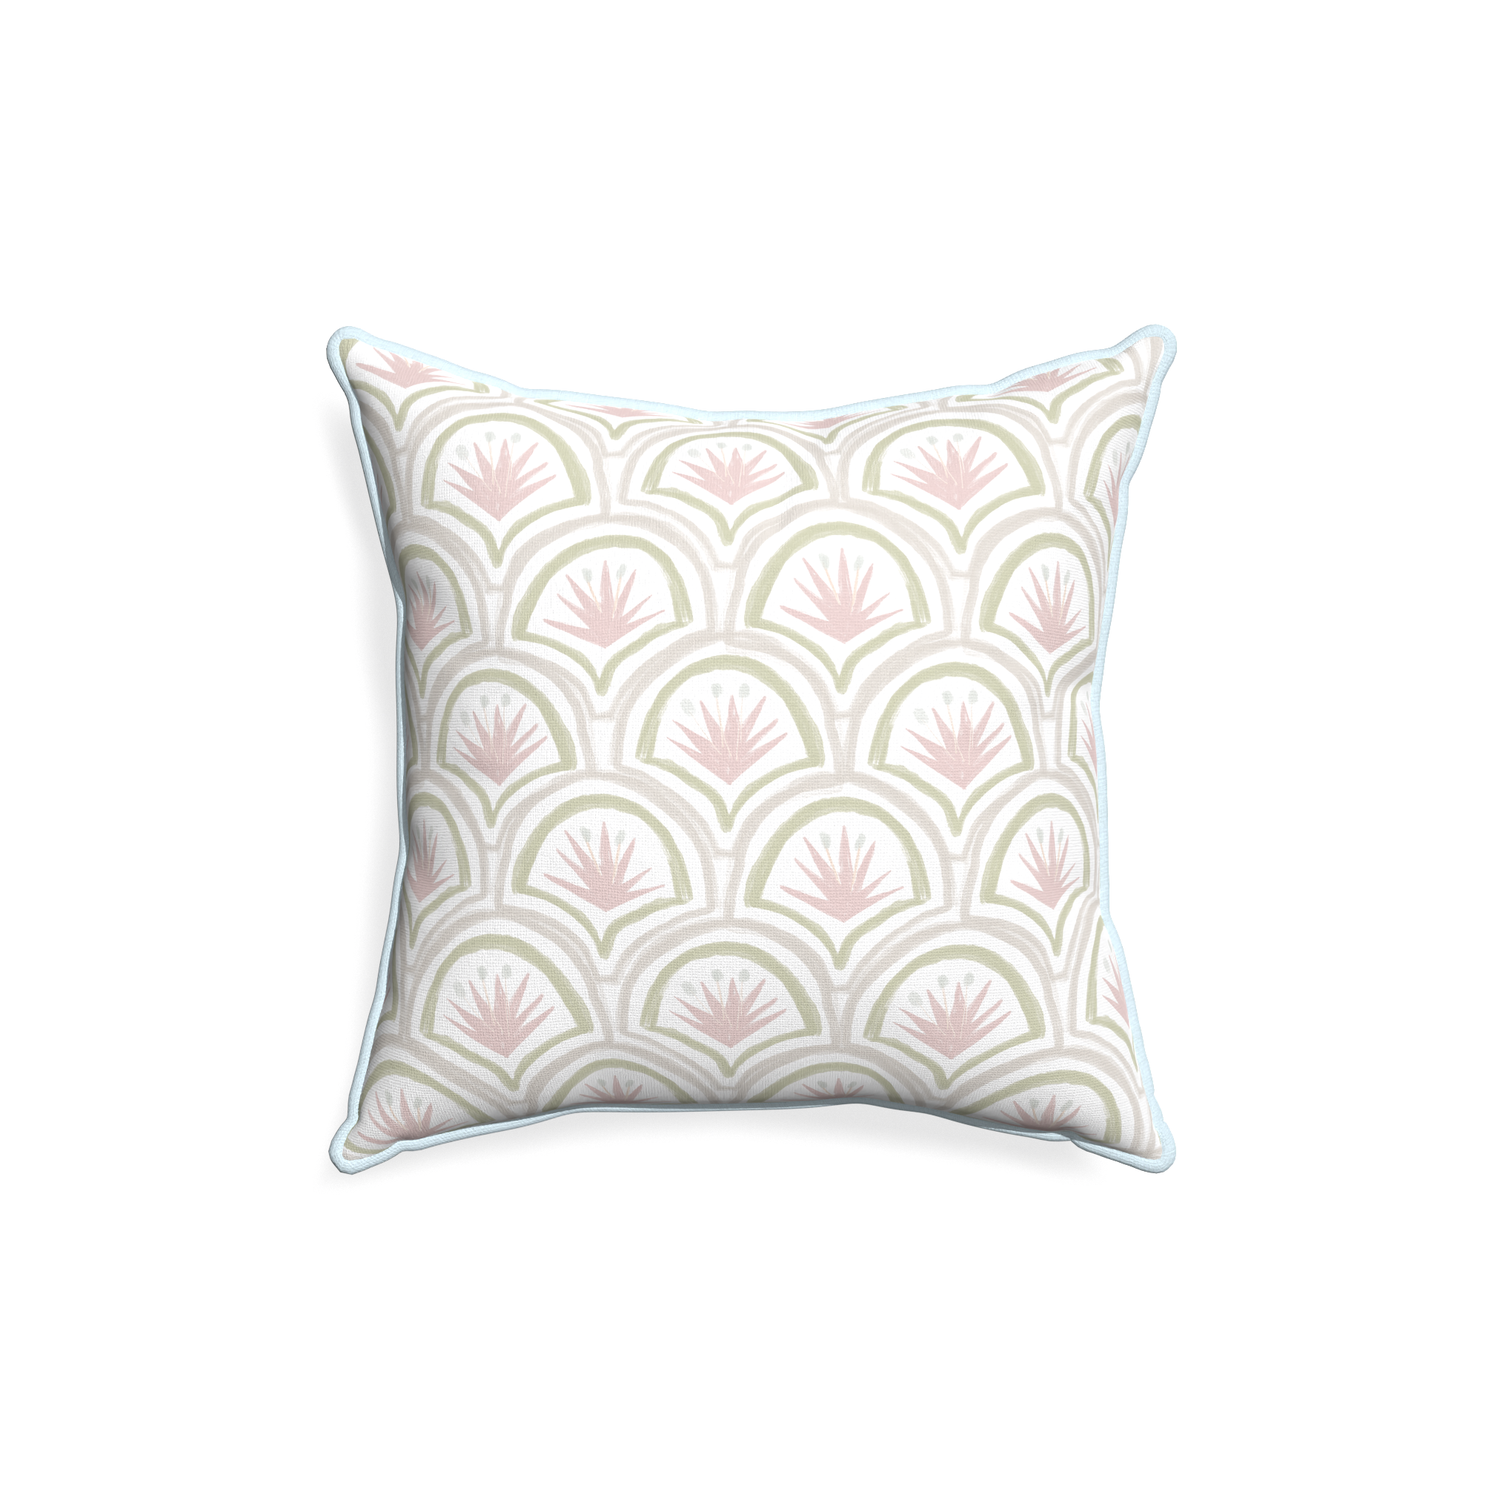 18-square thatcher rose custom pillow with powder piping on white background